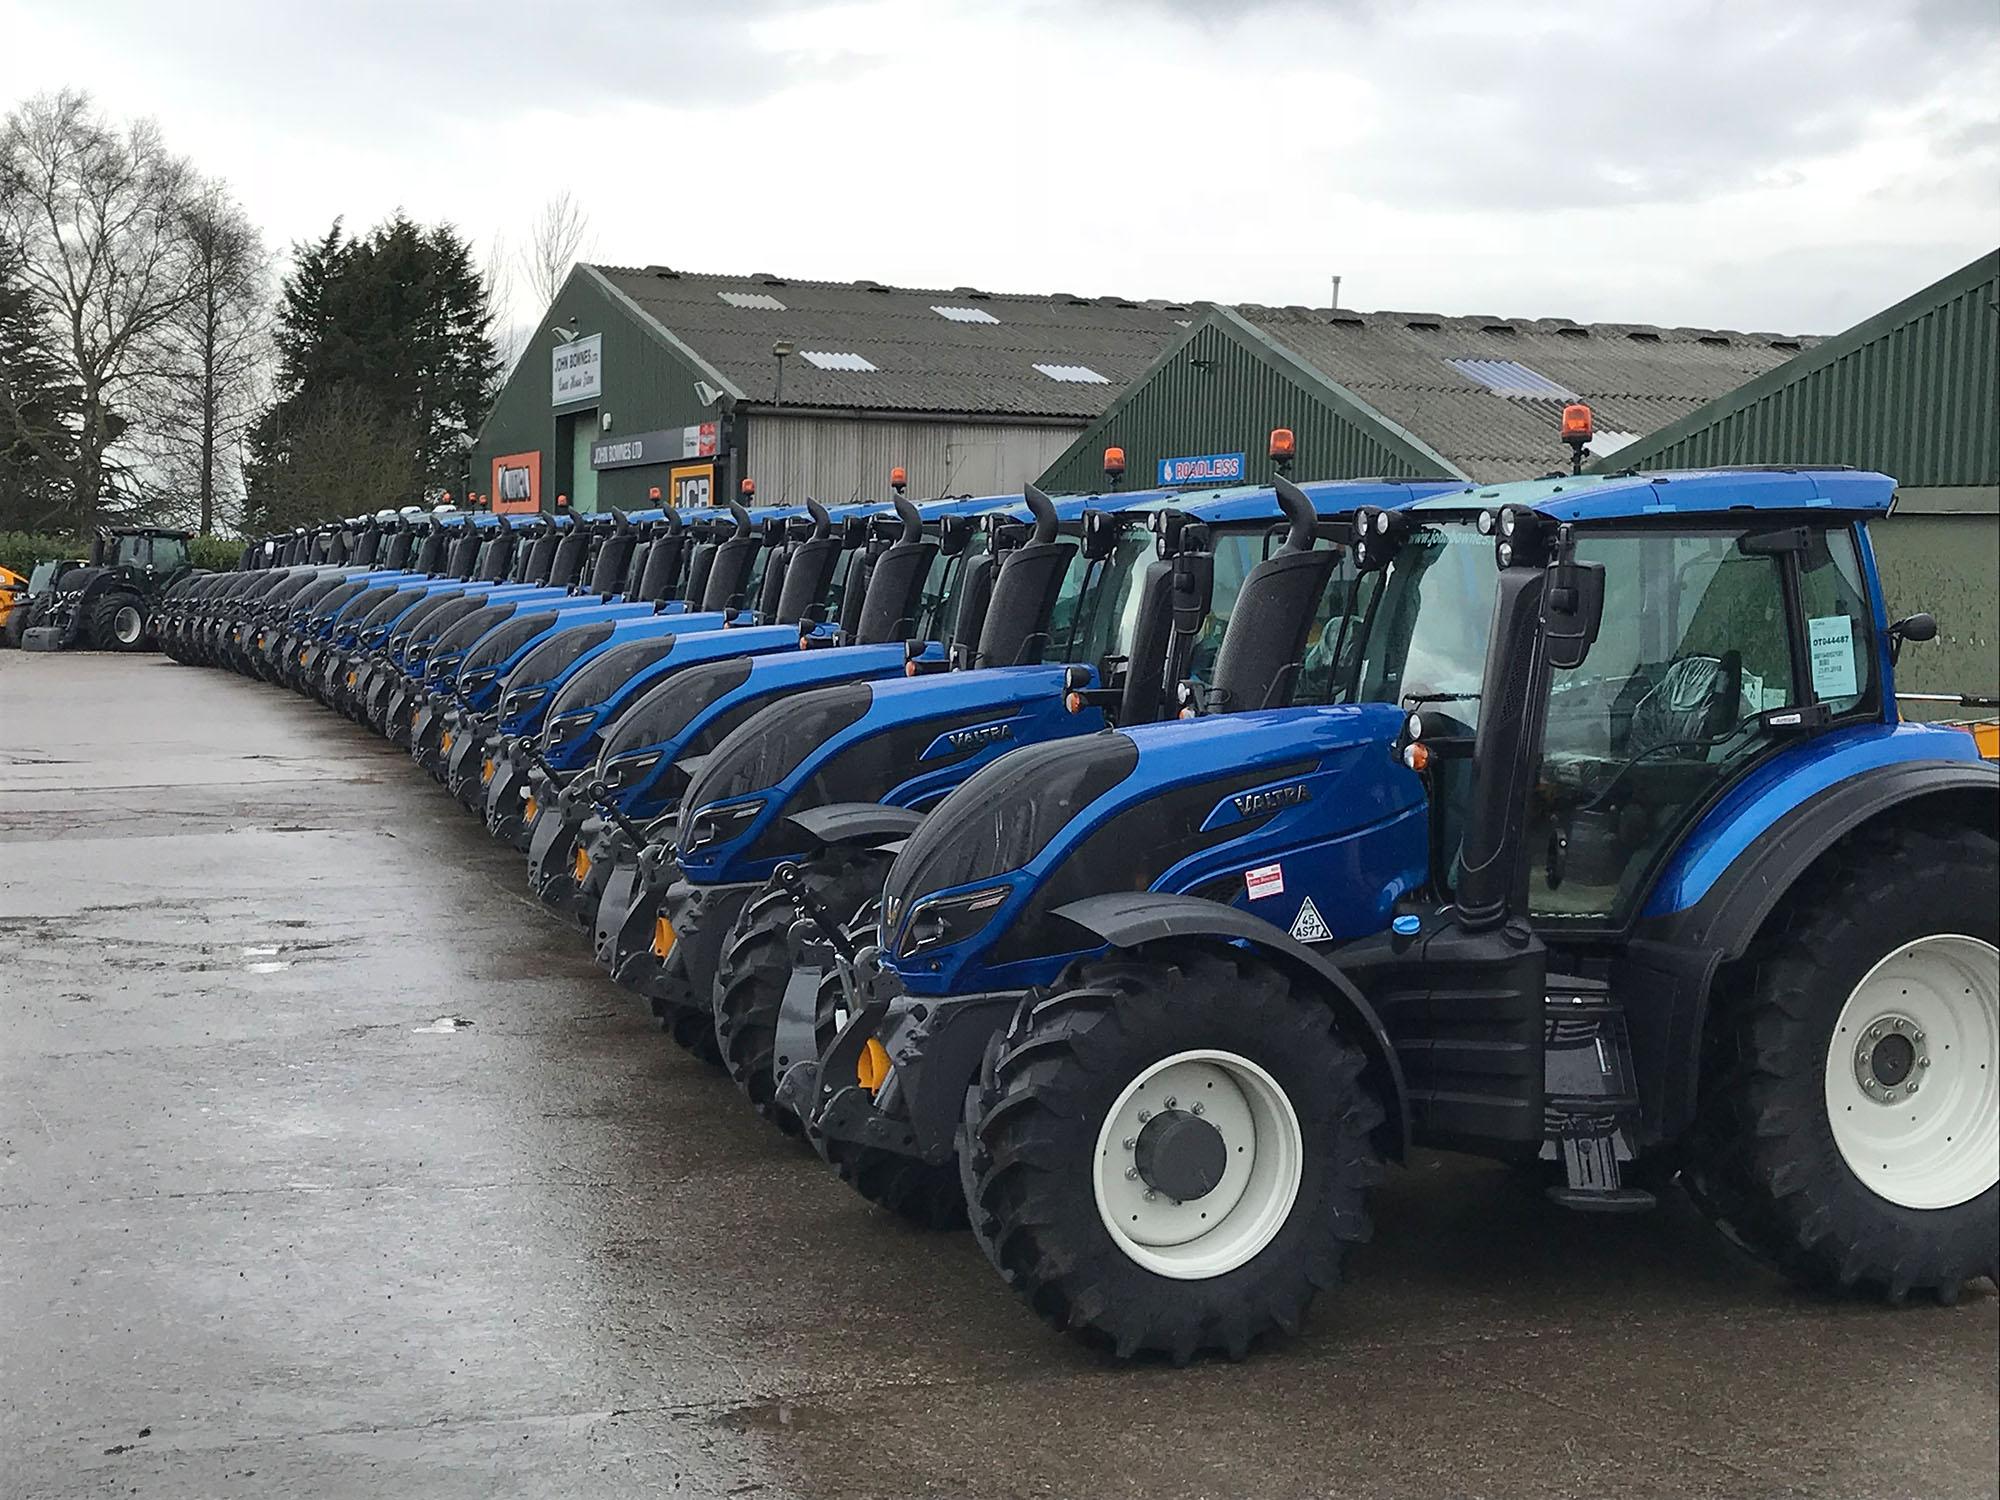 Line up of the new fleet of Valtra tractors at dealer John Bownes Ltd. Ready for hand over.